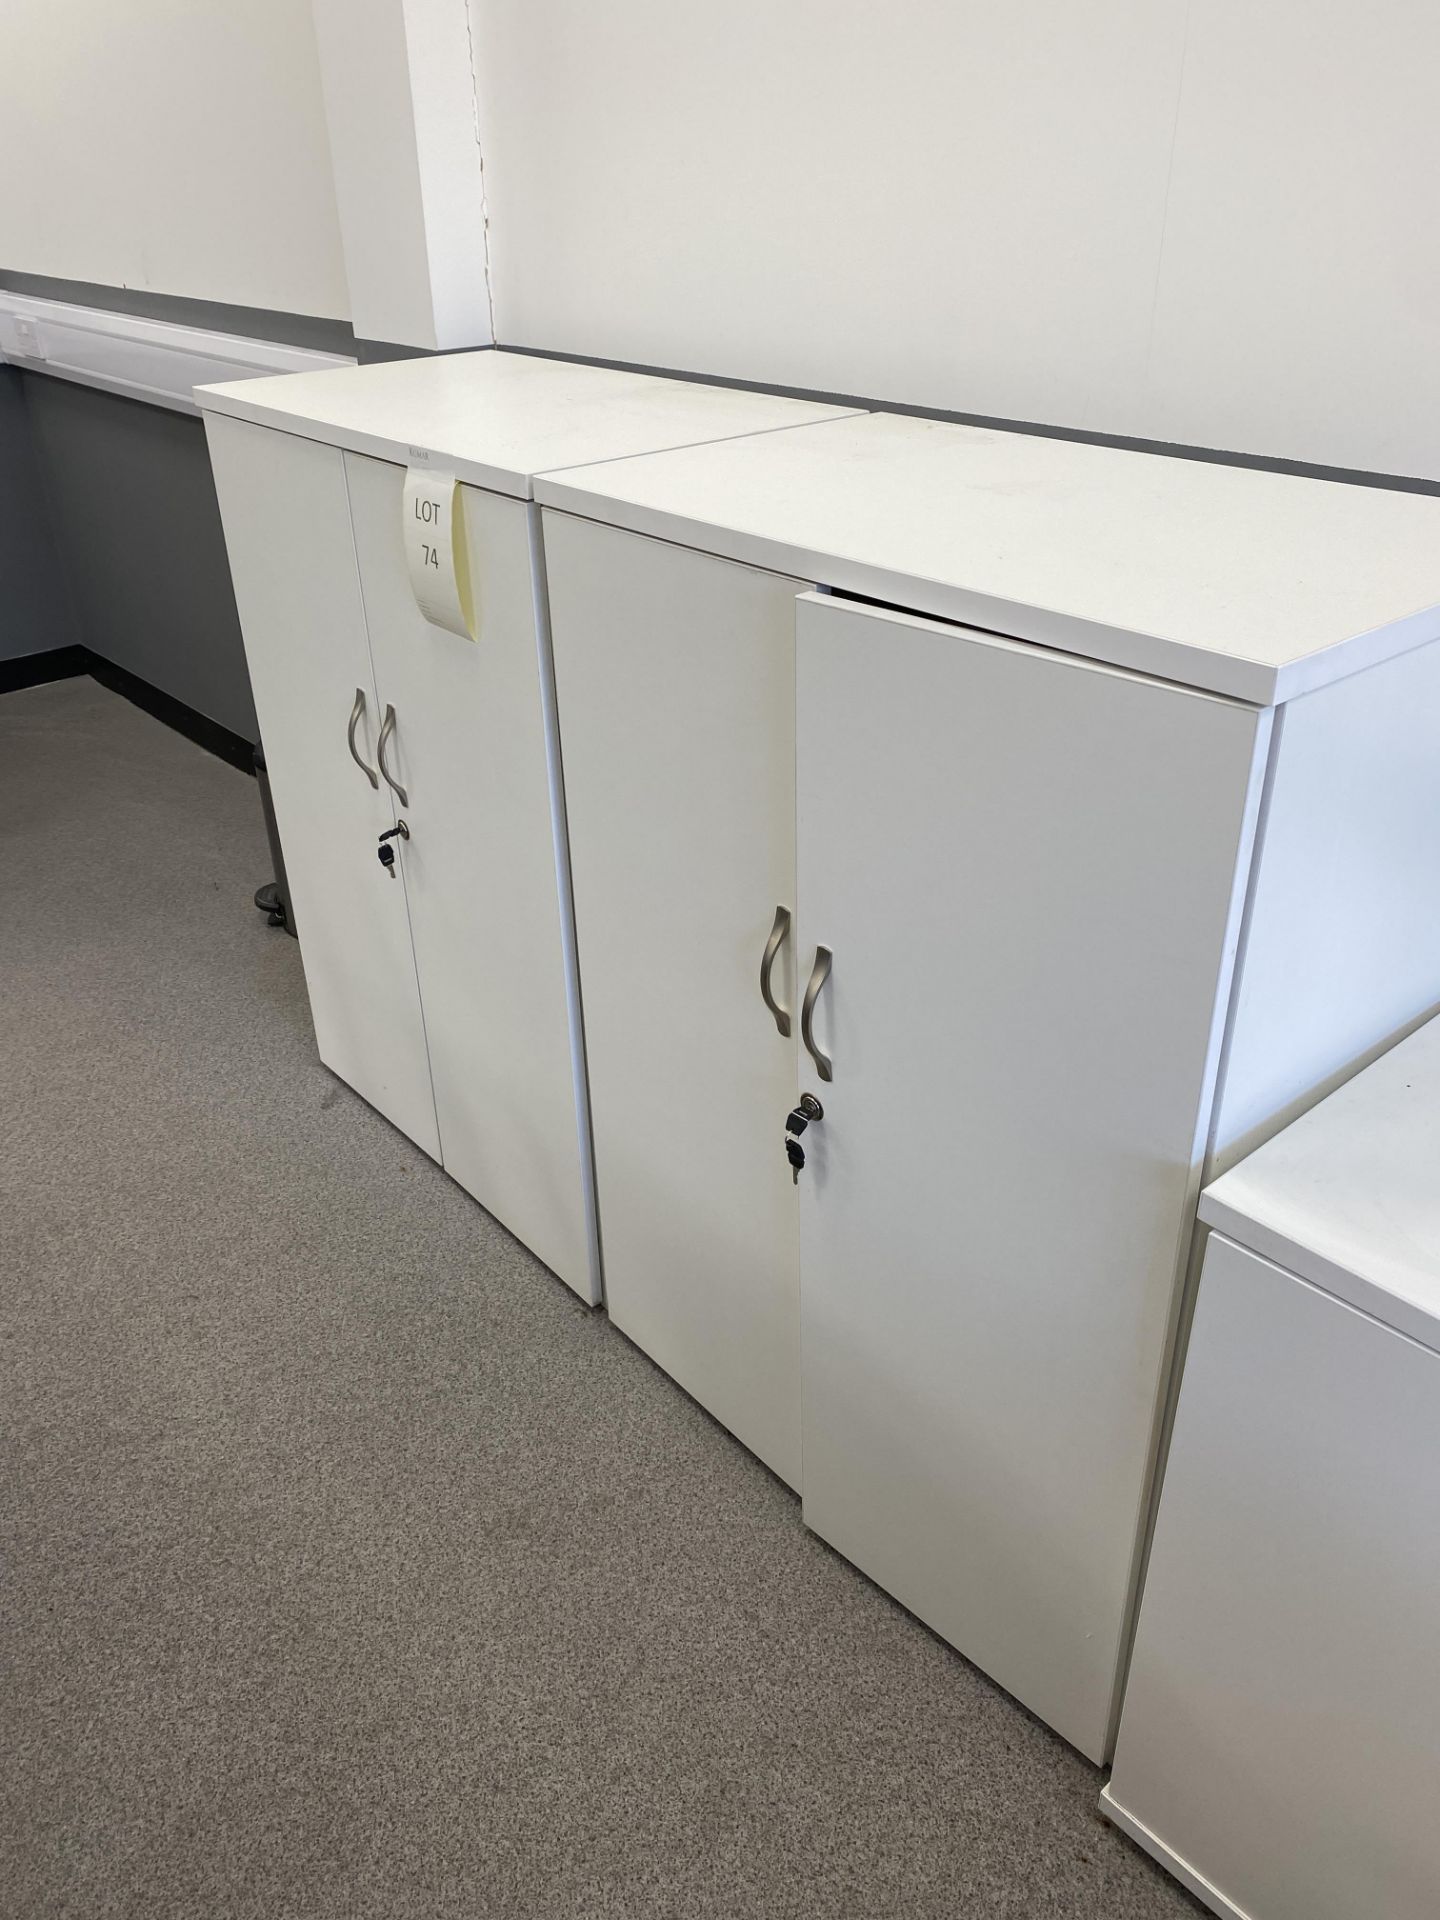 2 White Melomine Office Cupboards with Keys 0.80m X 0.47m X 110m - Image 6 of 6